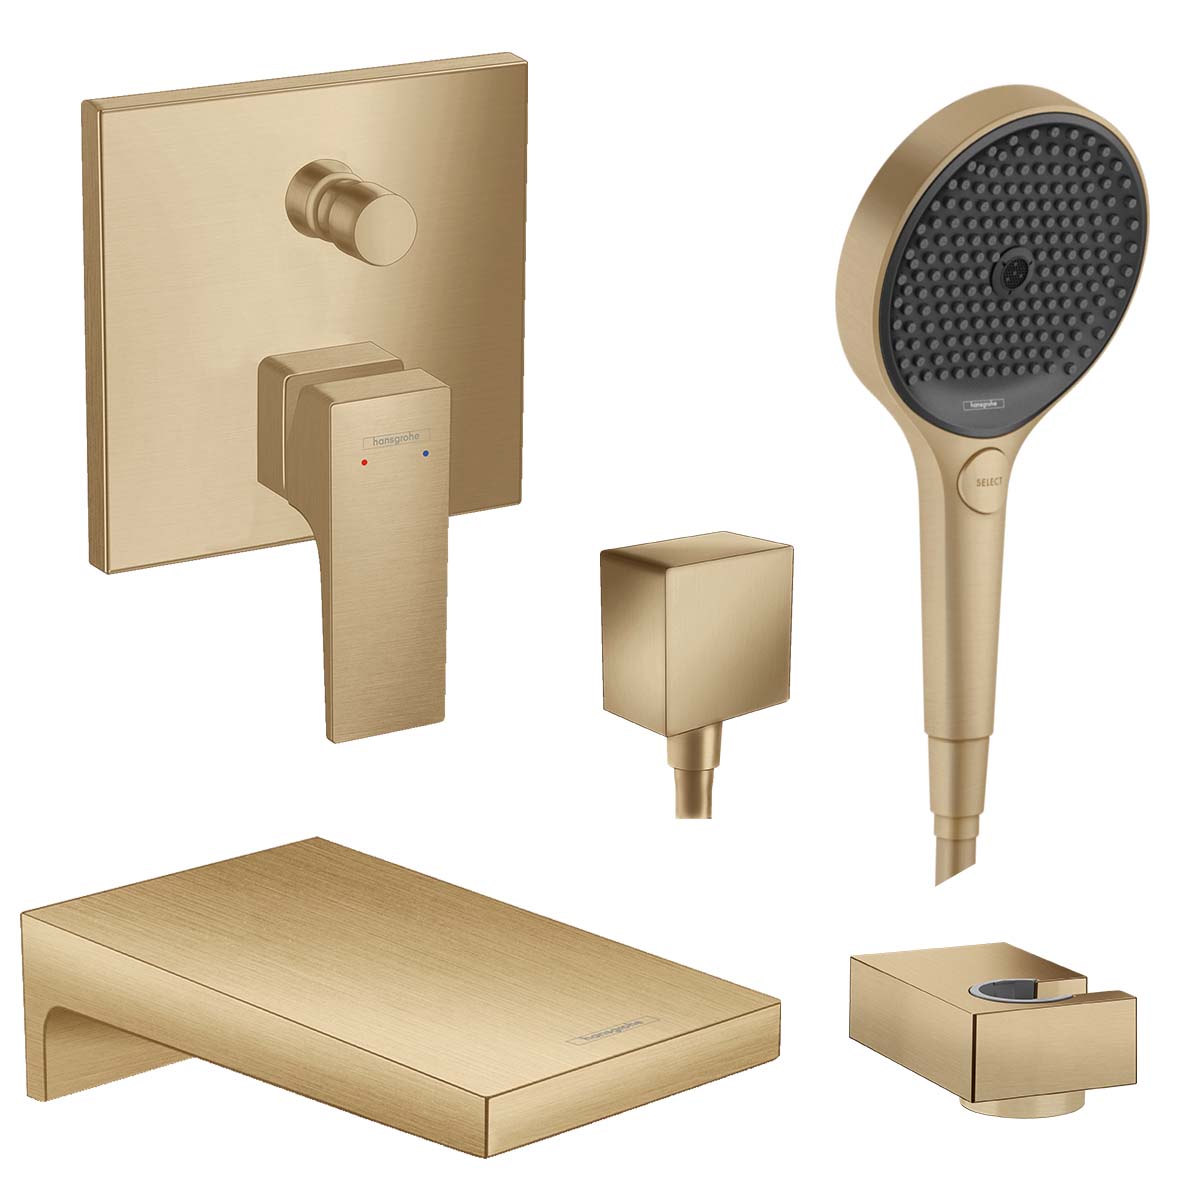 Hansgrohe Metropol Single Lever Bath Mixer and Spout with Rainfinity Shower Handset in Brushed Bronze